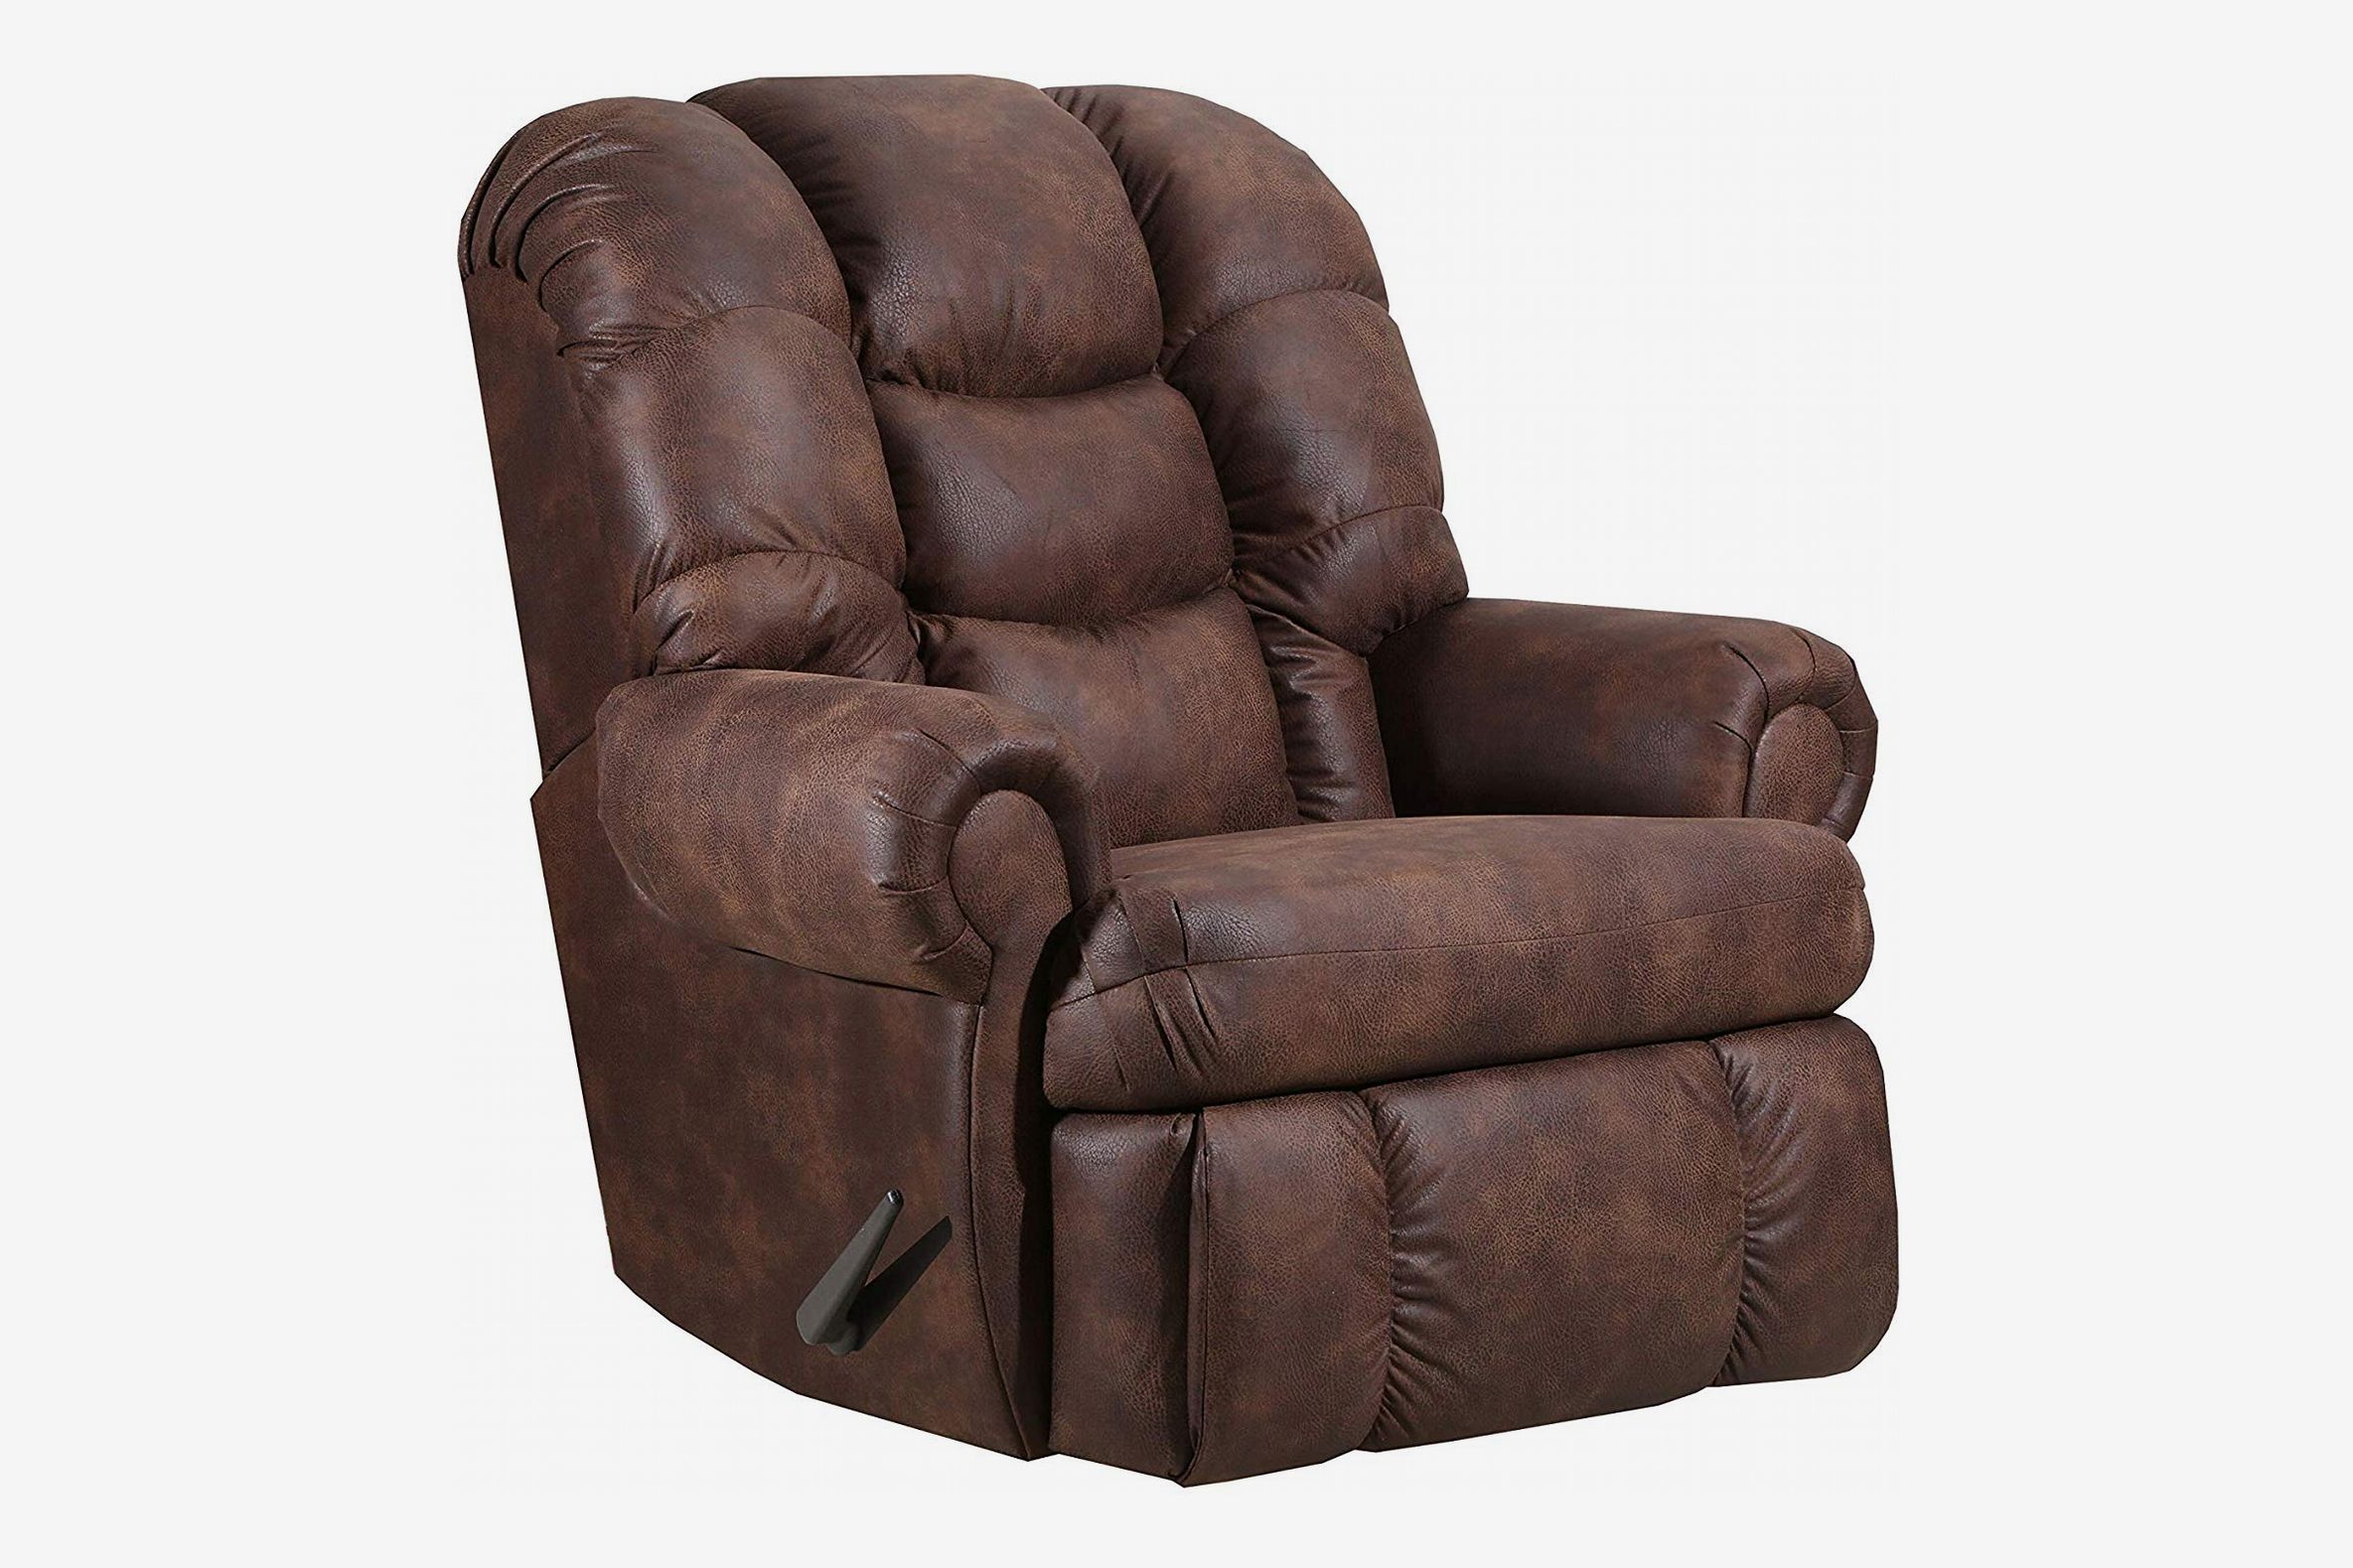 5 Best Leather Recliners 2019 The, Leather Recliner Chairs Reviews